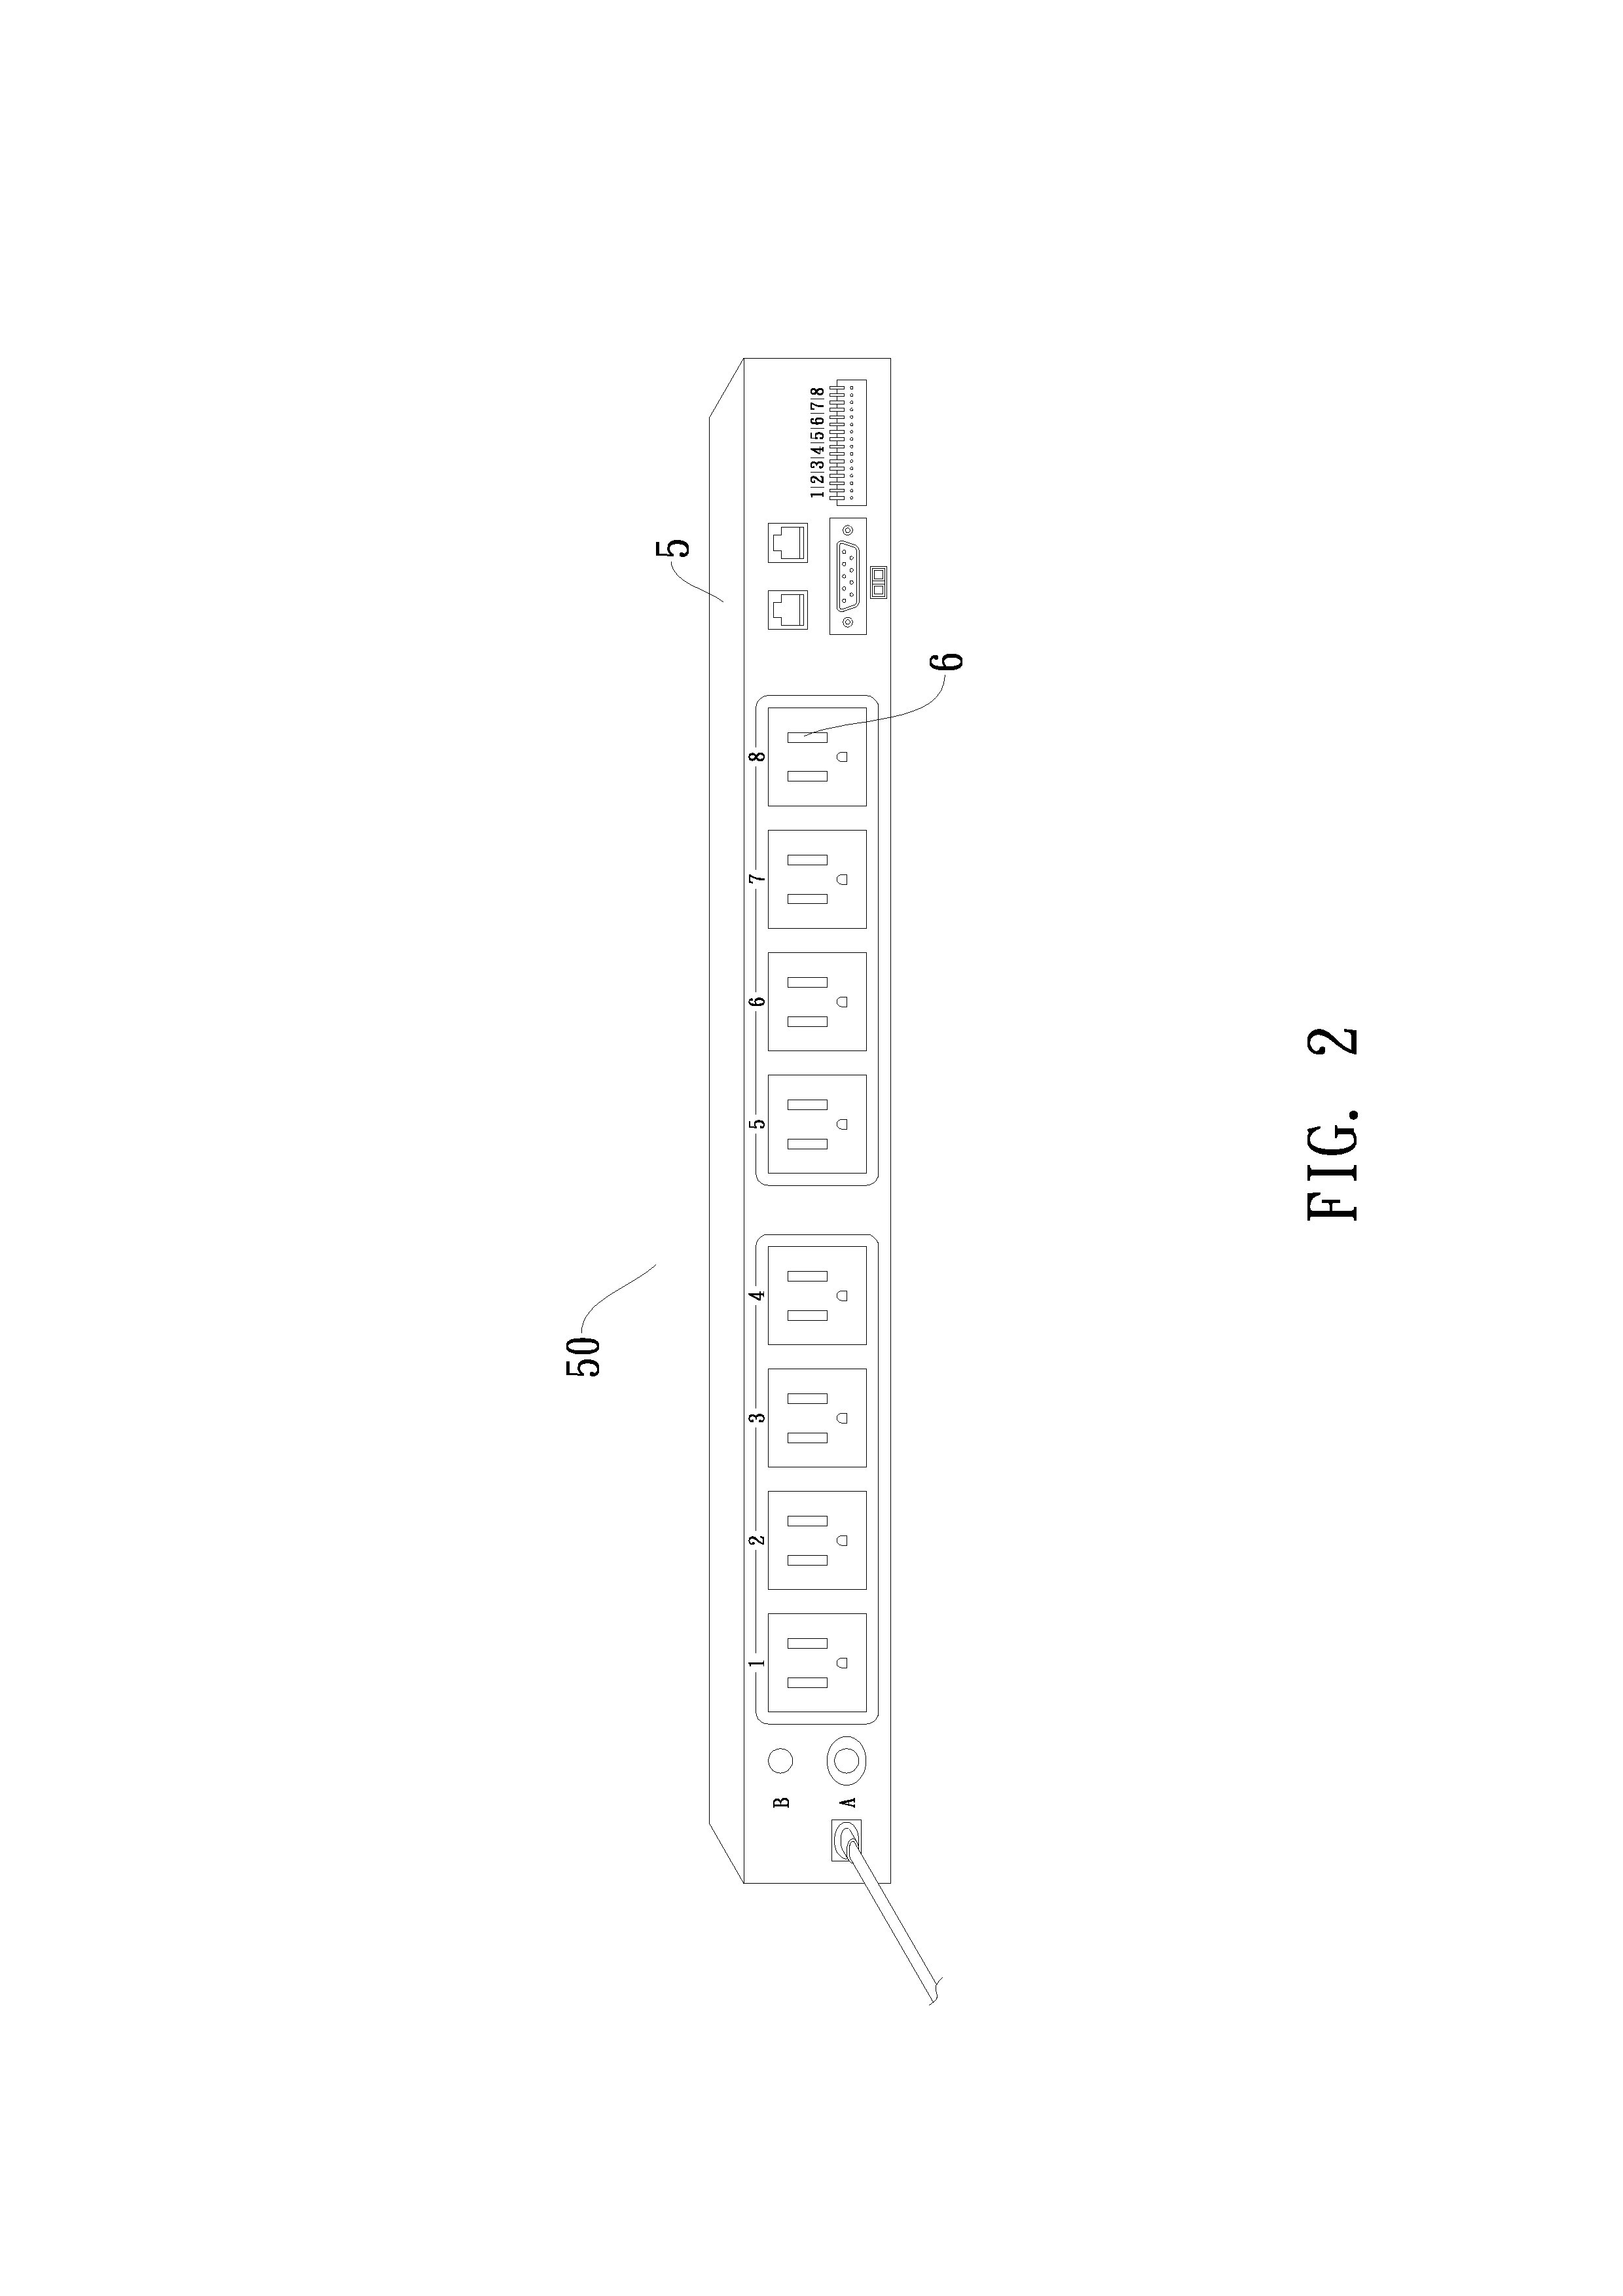 Intelligent power supply system and device having wireless identification